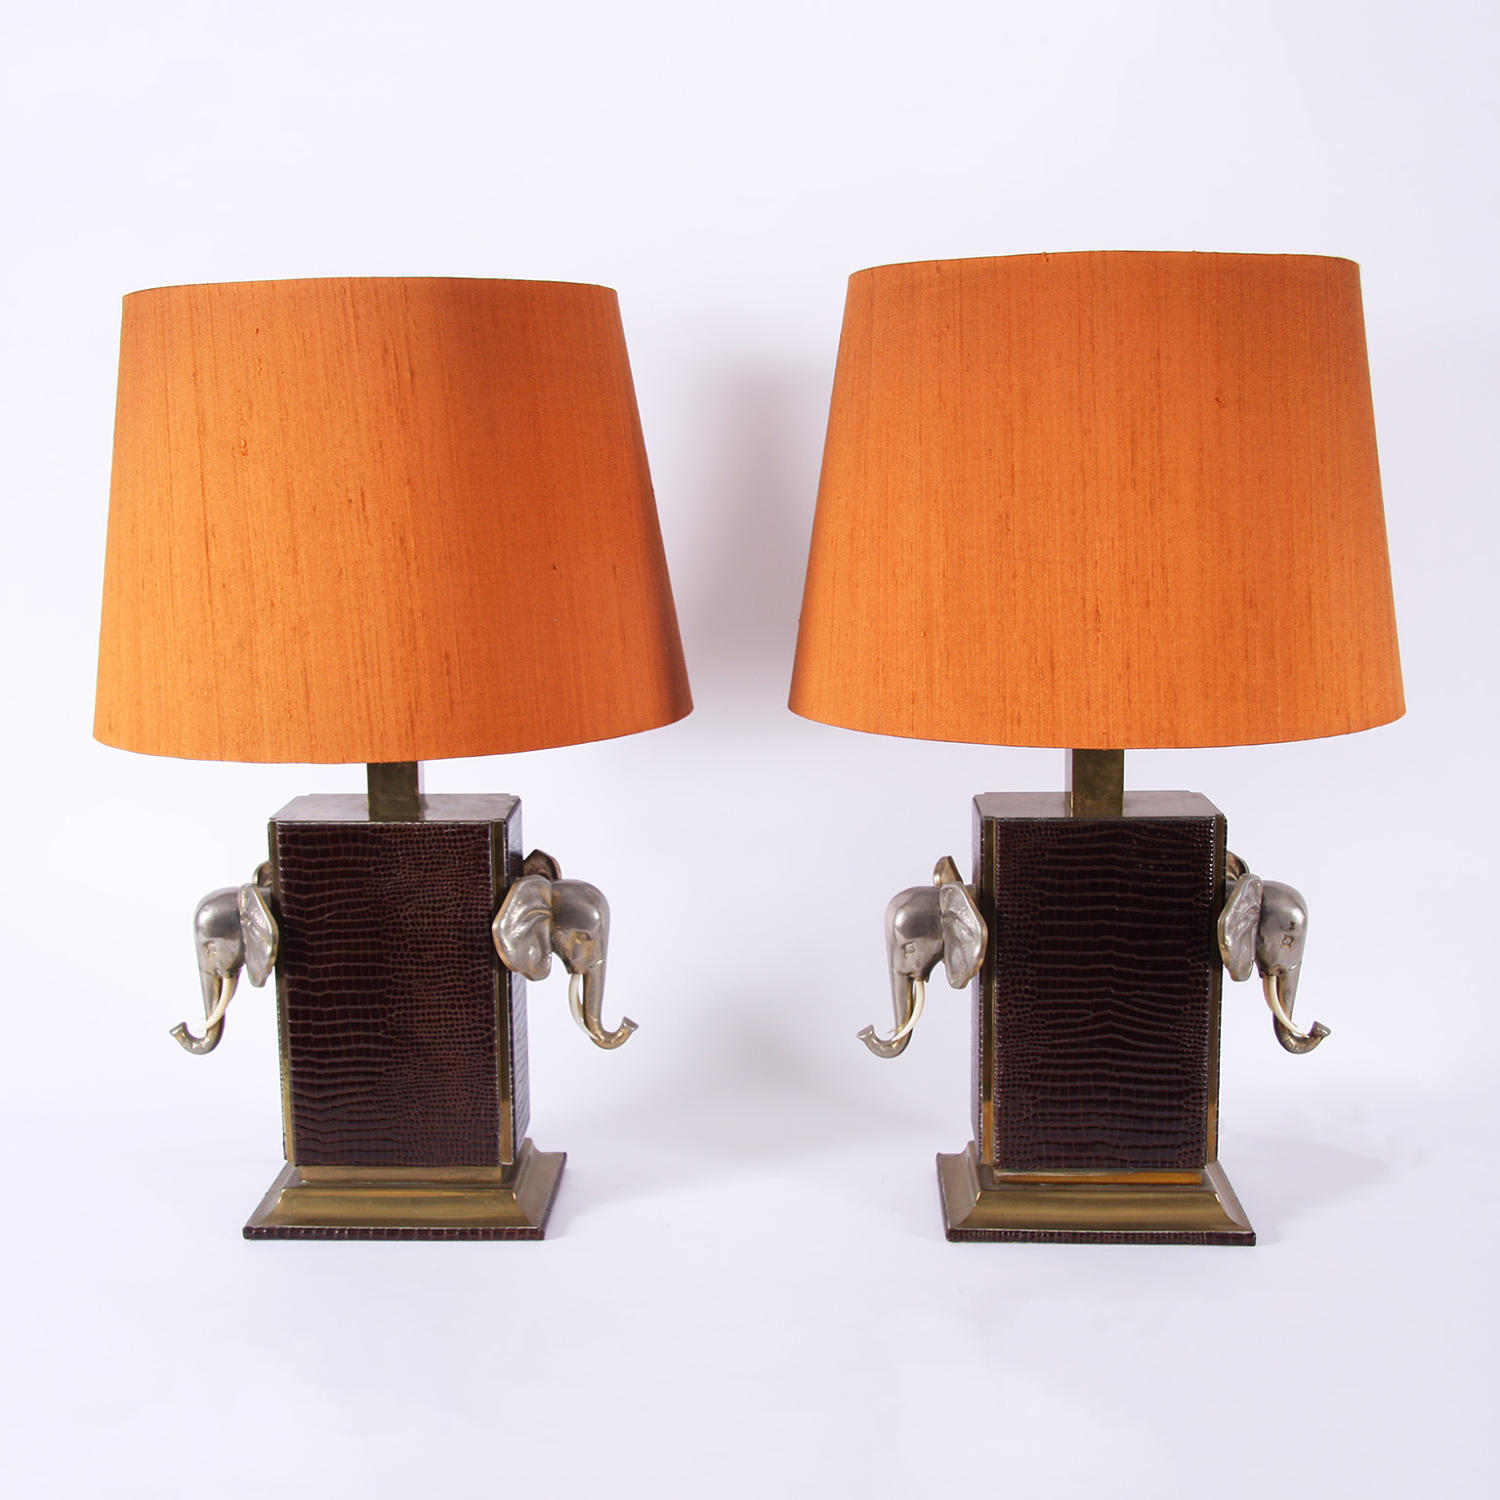 Pair of Elephant Table Lamps